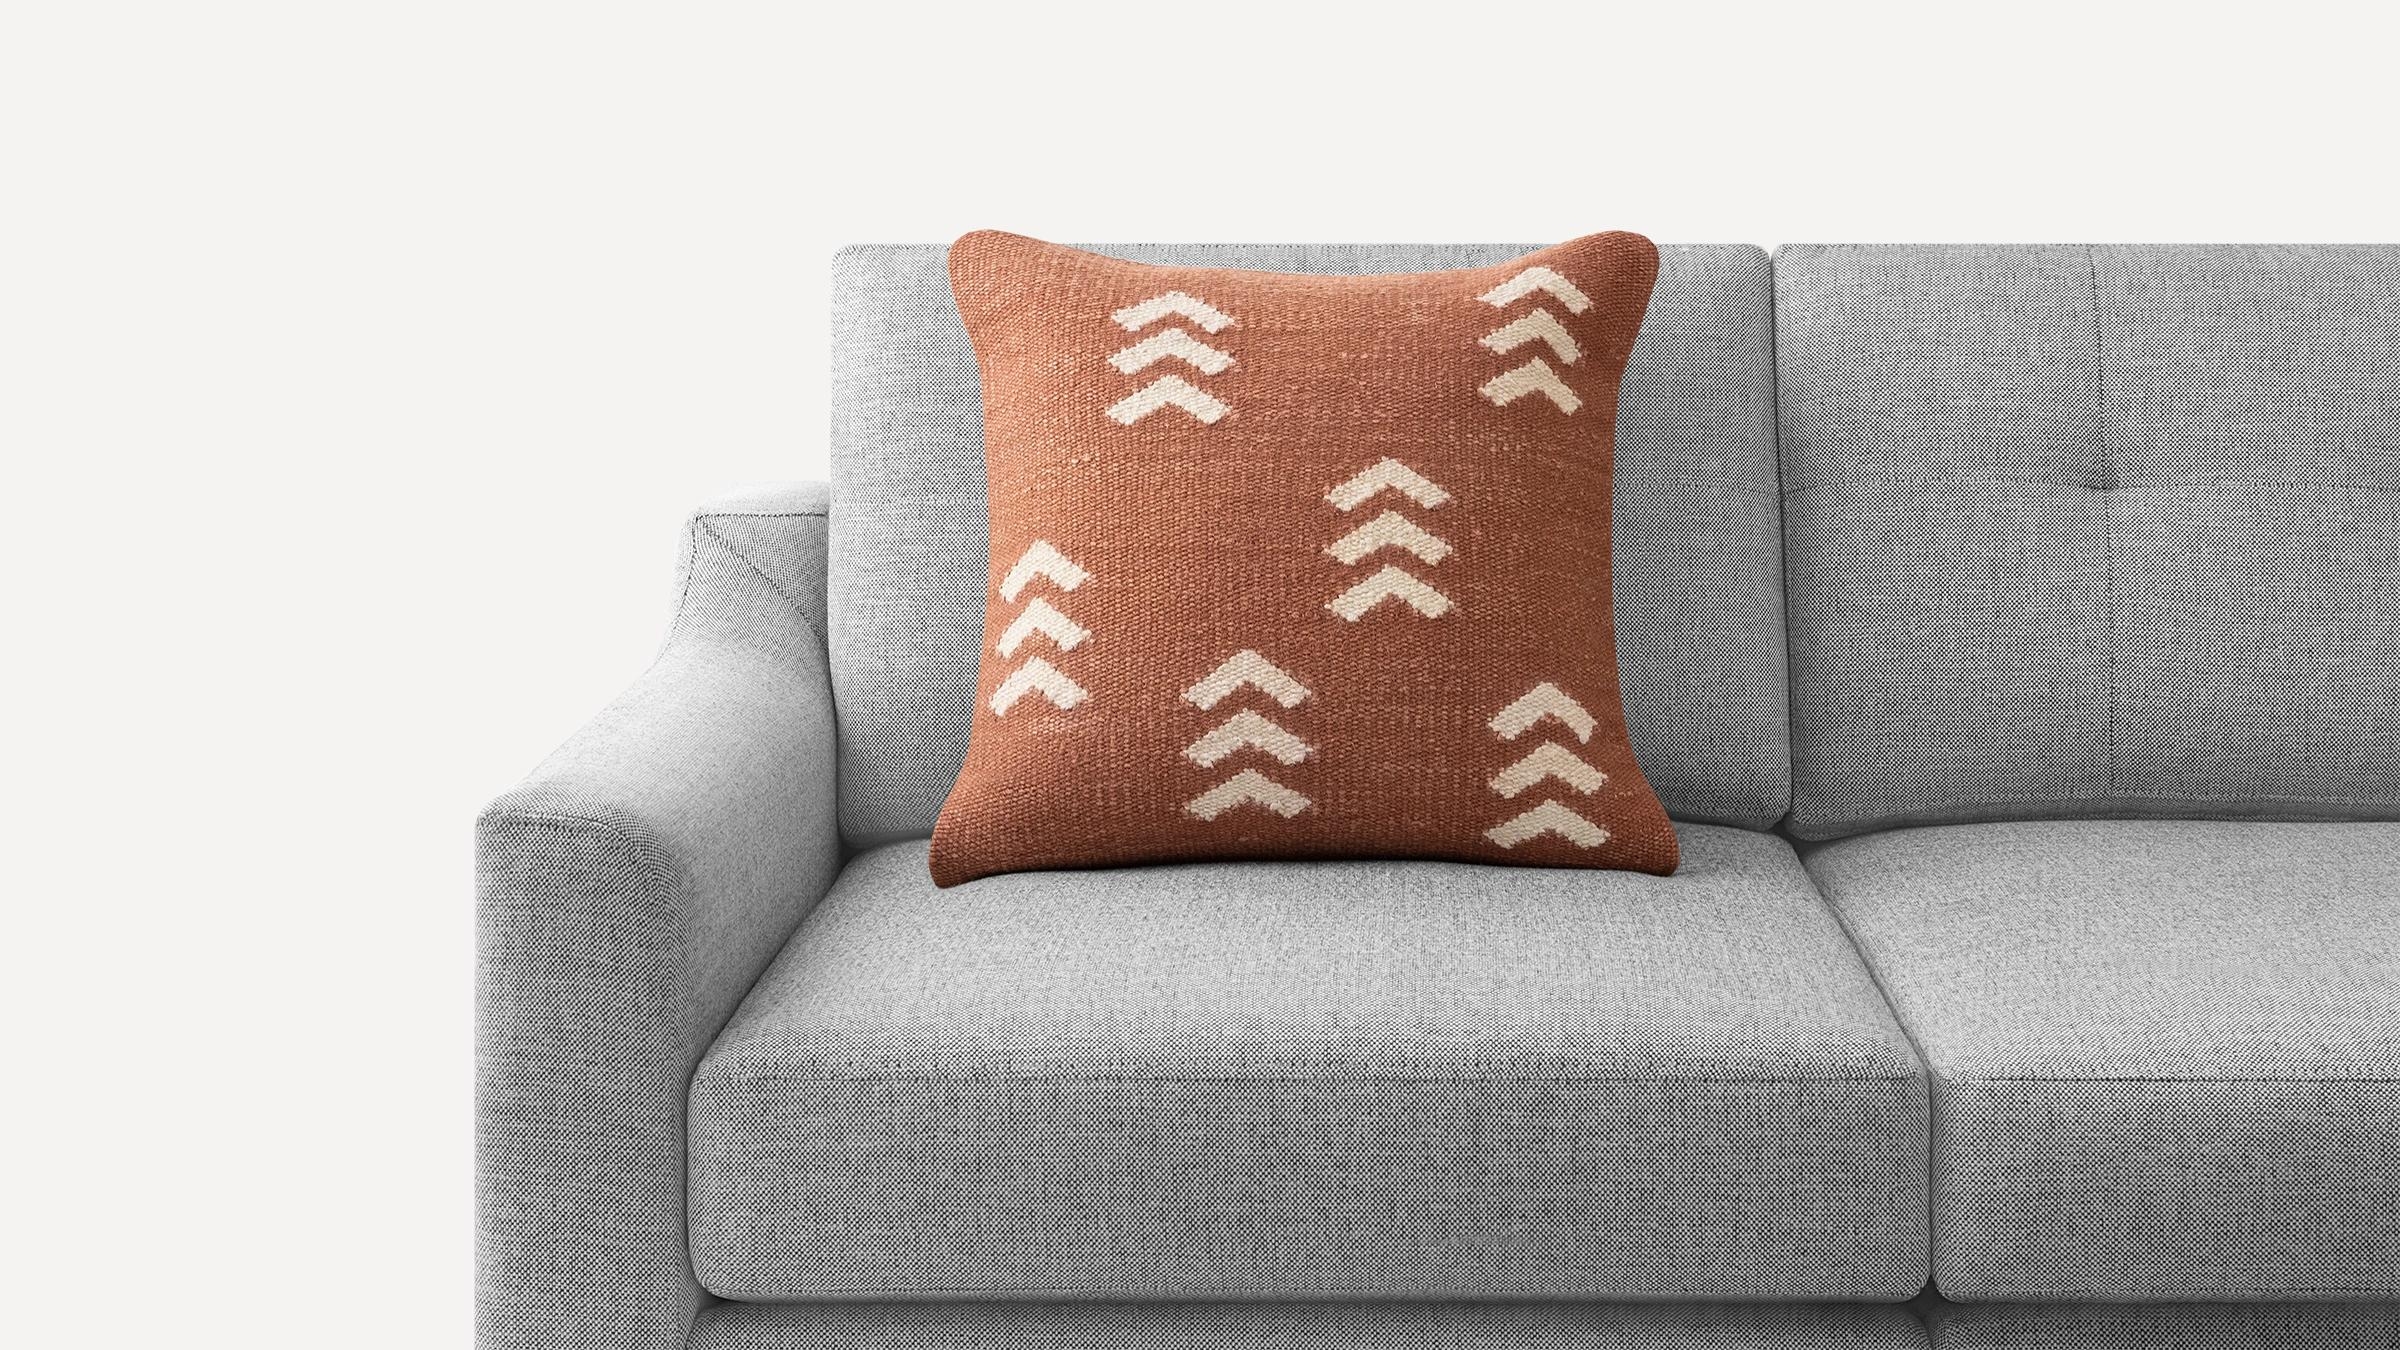 Chevron Hand-tufted Pillow Cover in Brick Red - Image 1